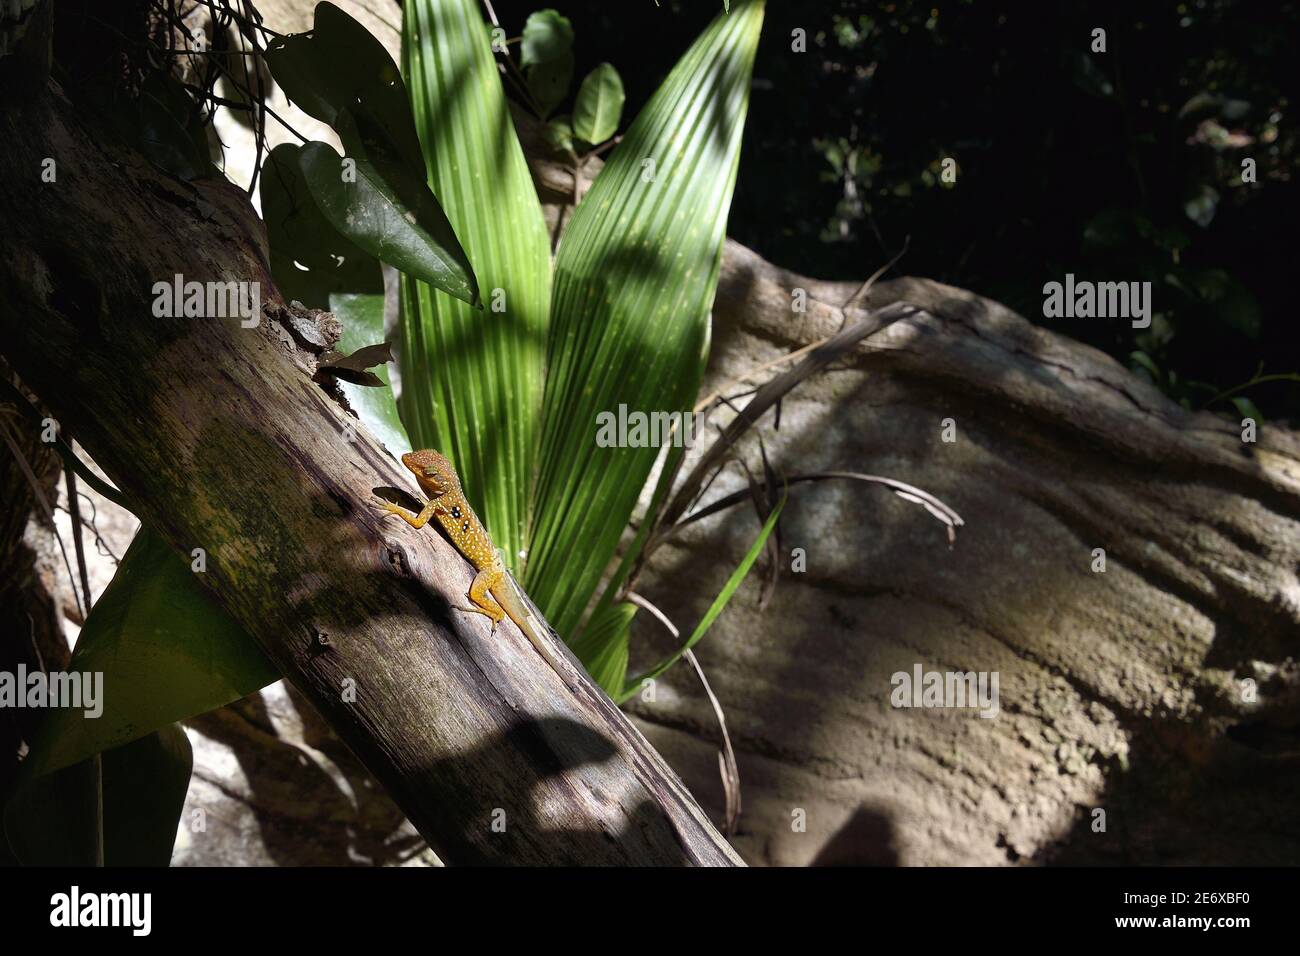 Caribbean, Dominica Island, Portsmouth, the banks of the Indian River, Dominica endemic anole tree lizard or Zanndoli (Anolis oculatus) on a tropical undergrowth trunk Stock Photo